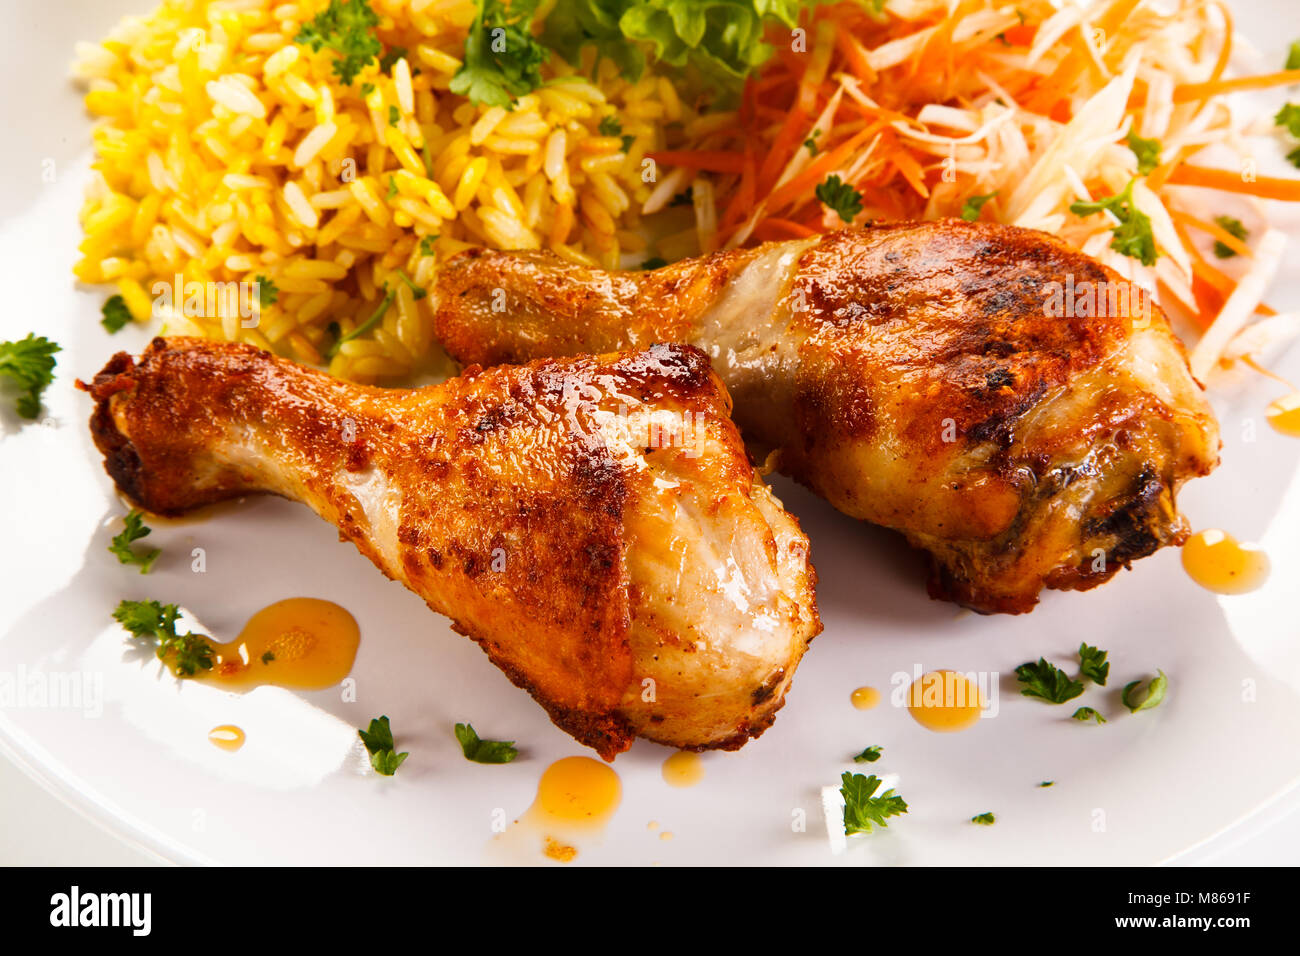 Roasted chicken drumsticks white rice and vegetables Stock Photo